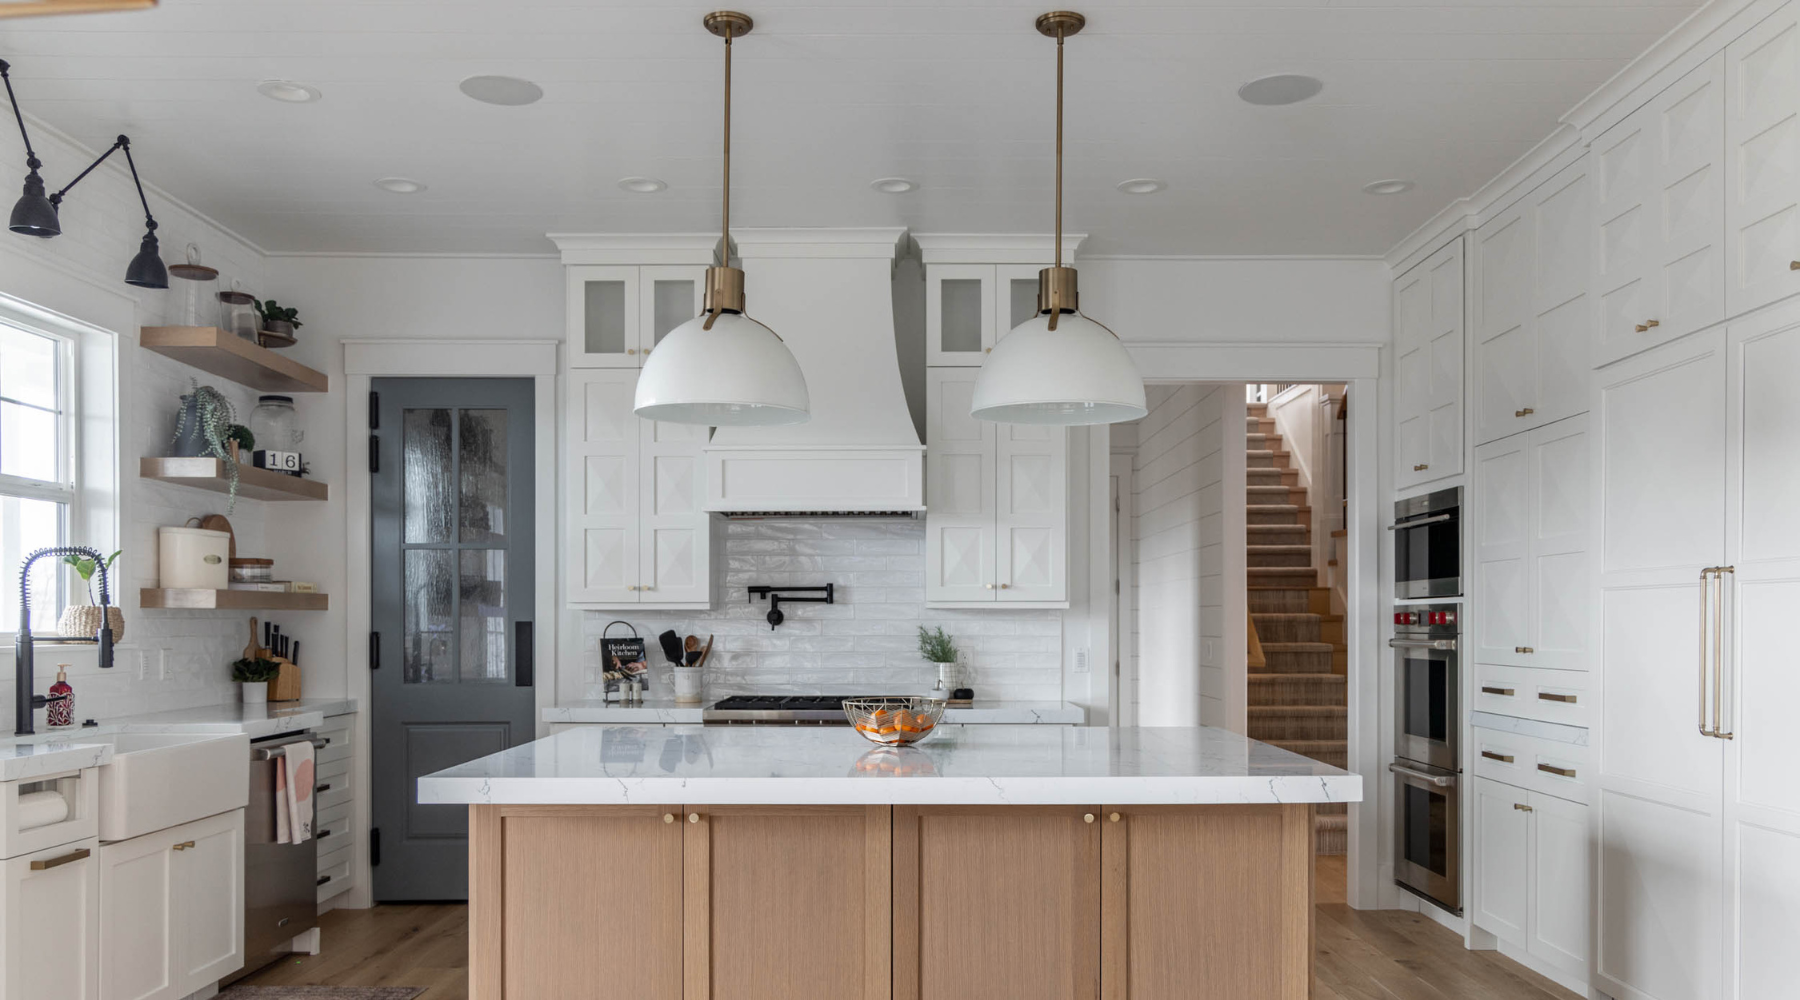 A kitchen with a tan island with white marble countertop, white cupboards, and two handing lights.